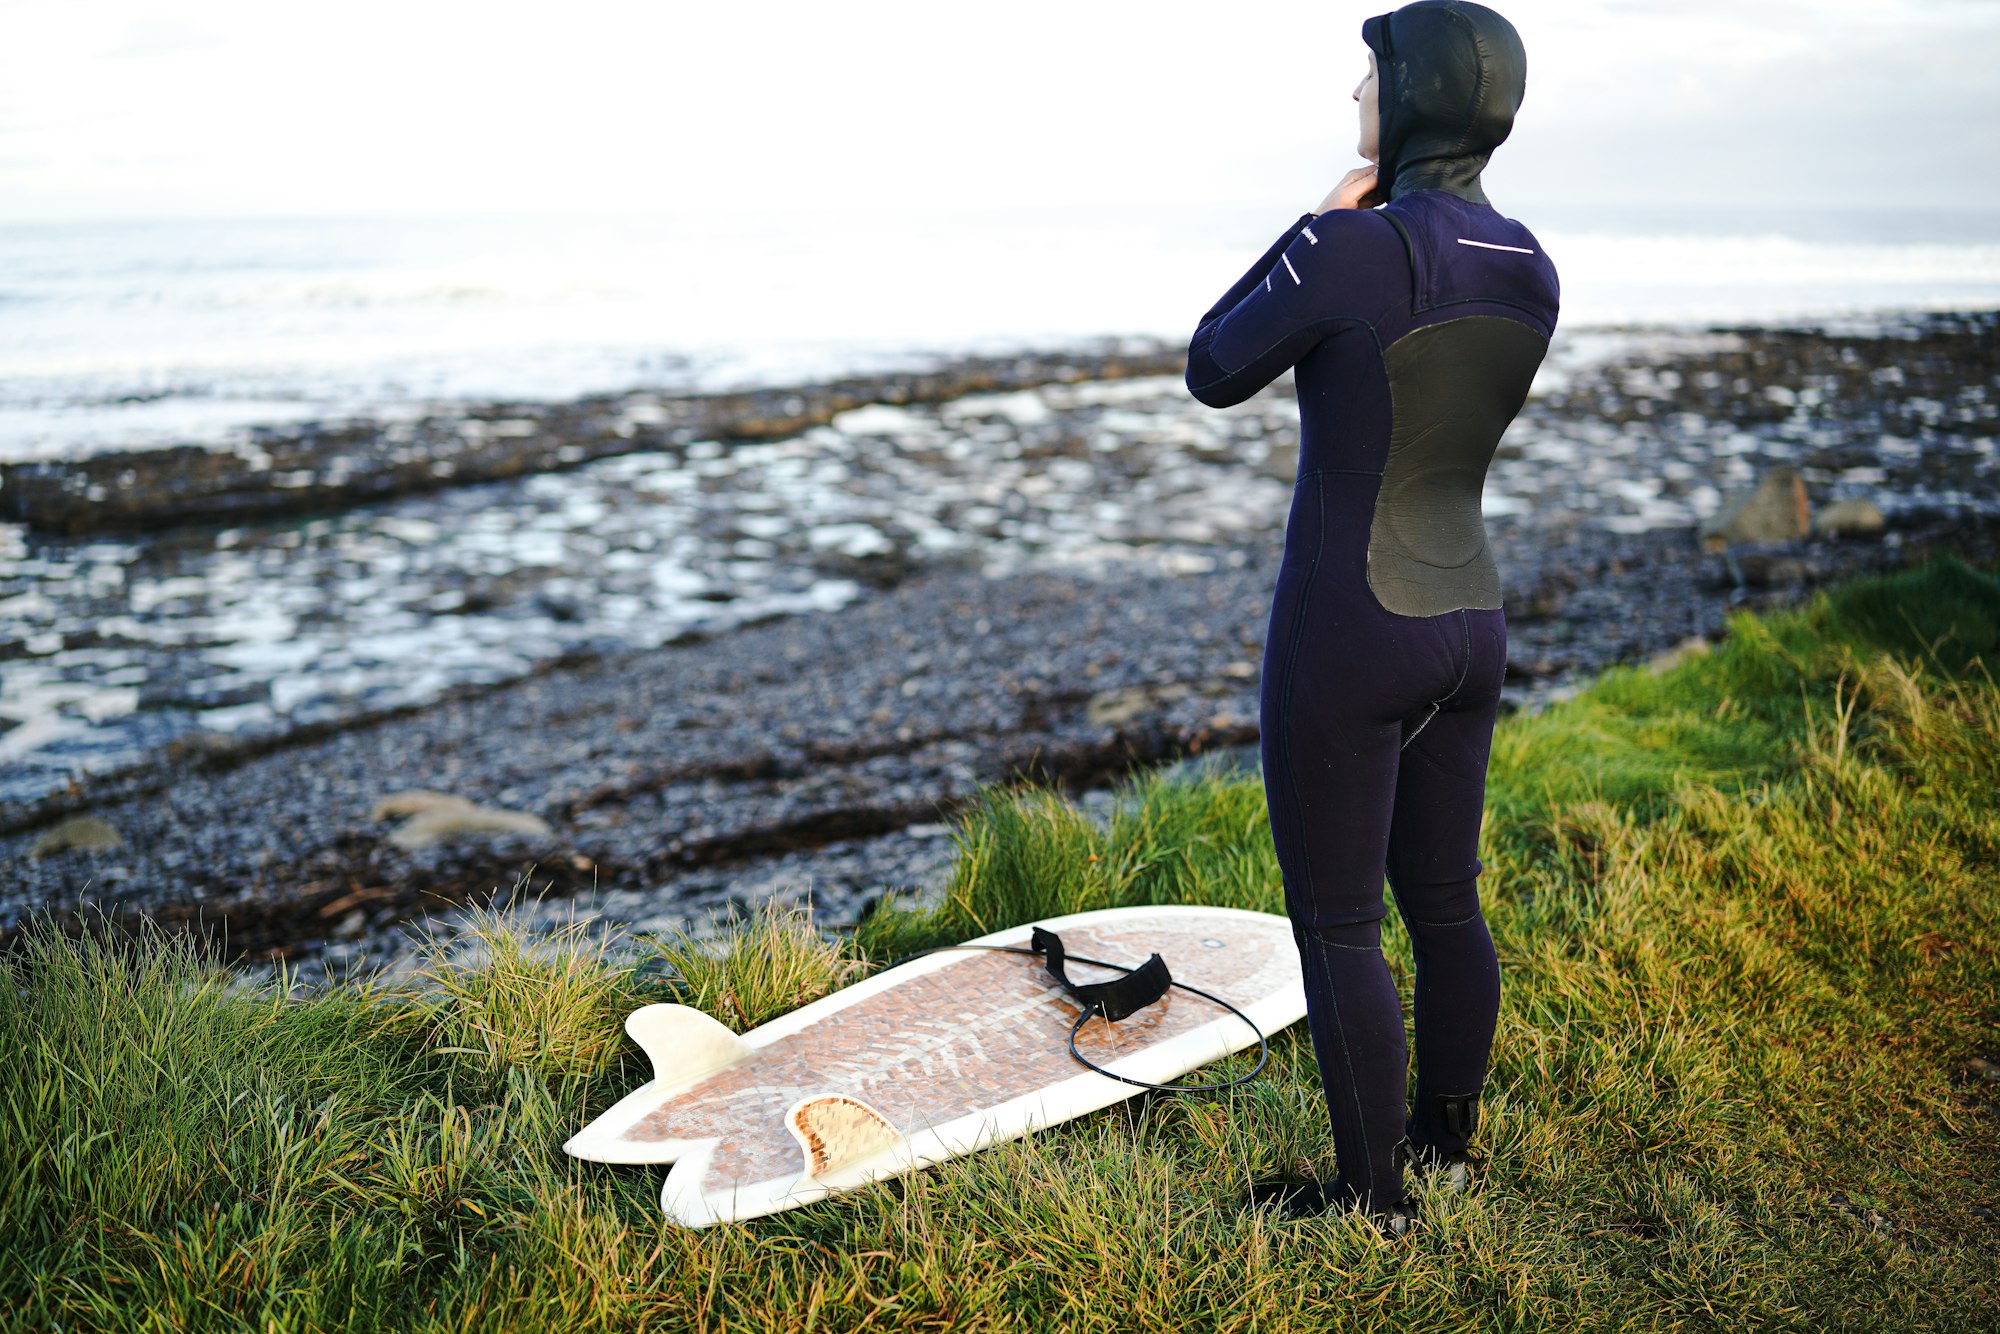 5 time Irish national champ Easkey Britton surfing a surfboard made of 5,000 cigarette butts at Easkey Beach in Ireland